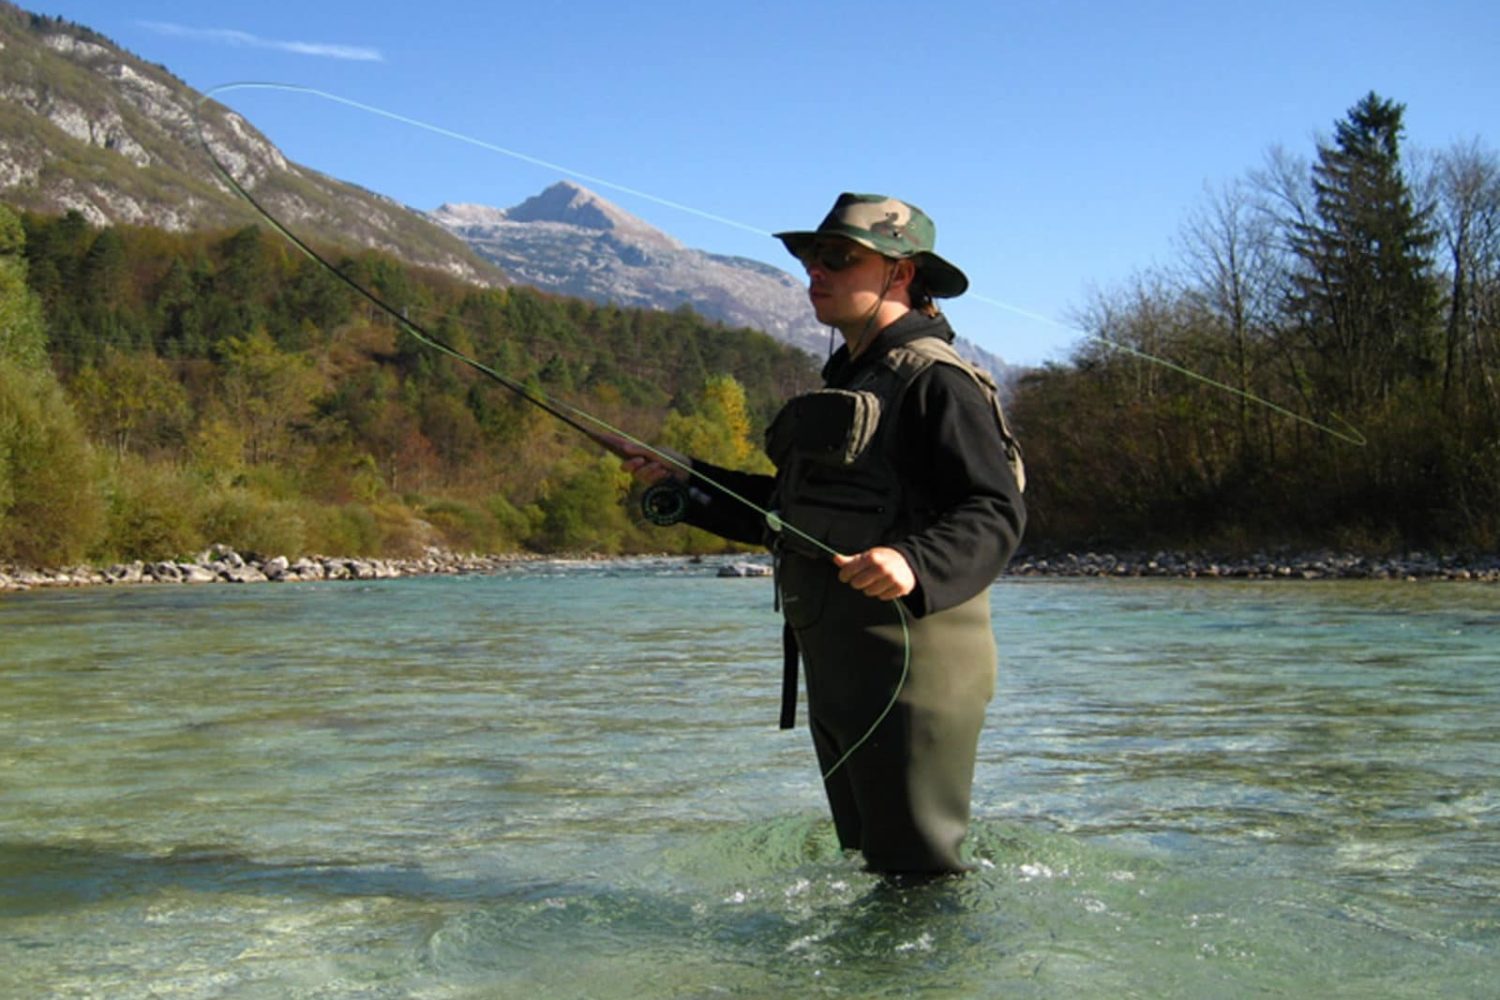 Fly fishing in rivers